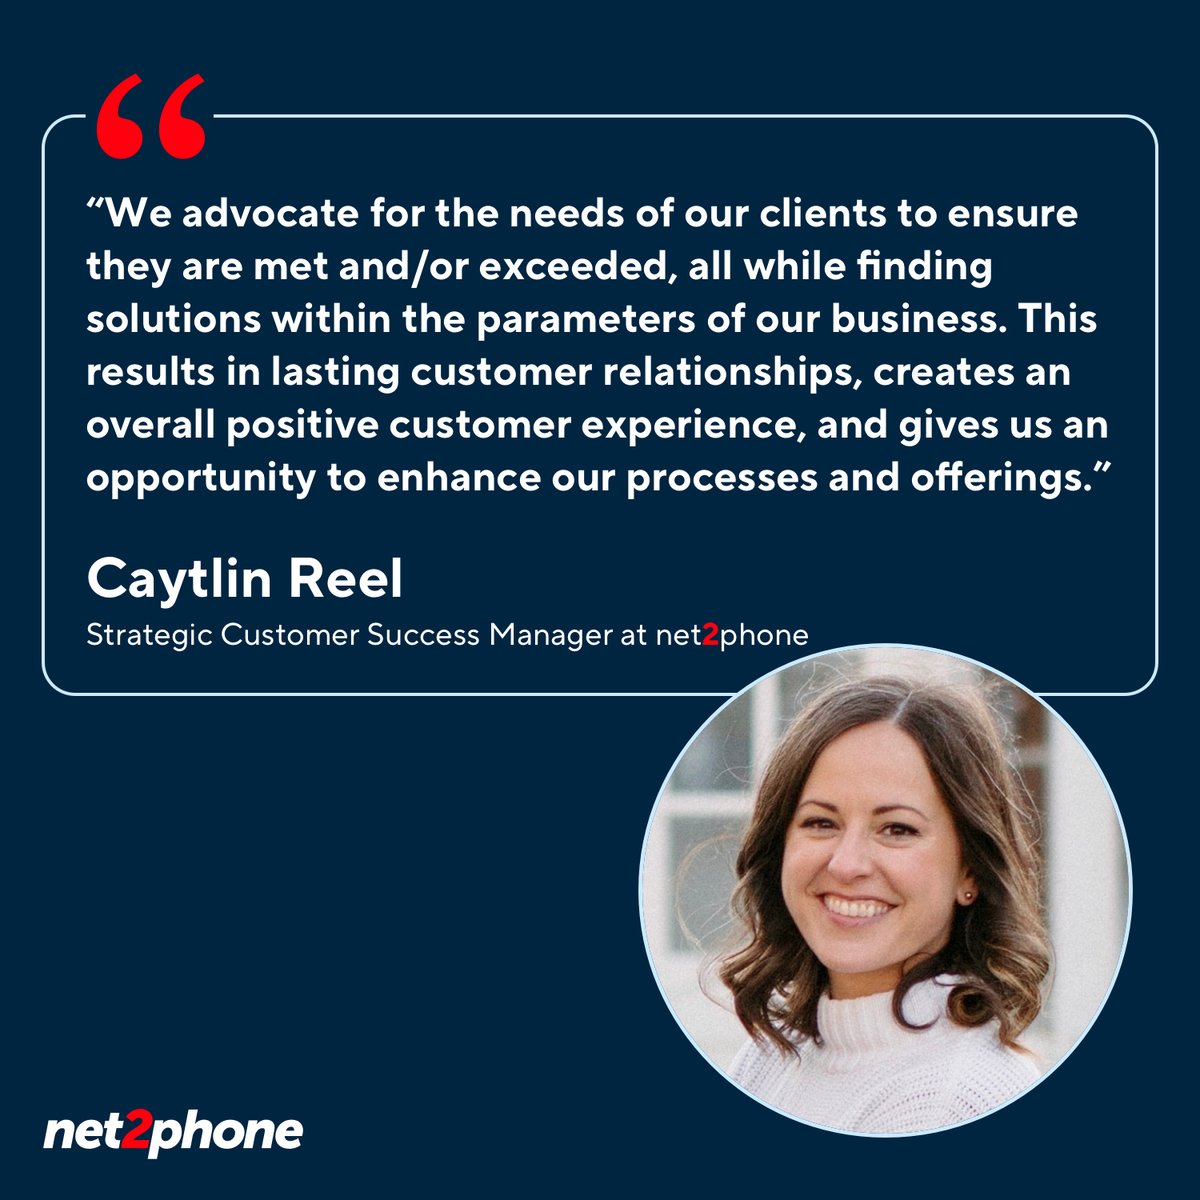 Being a customer advocate while finding realistic solutions to your customer's pain points can be hard. But when you find that perfect balance, it's a winning combination both for customers and your business! #CustomerServiceWeek